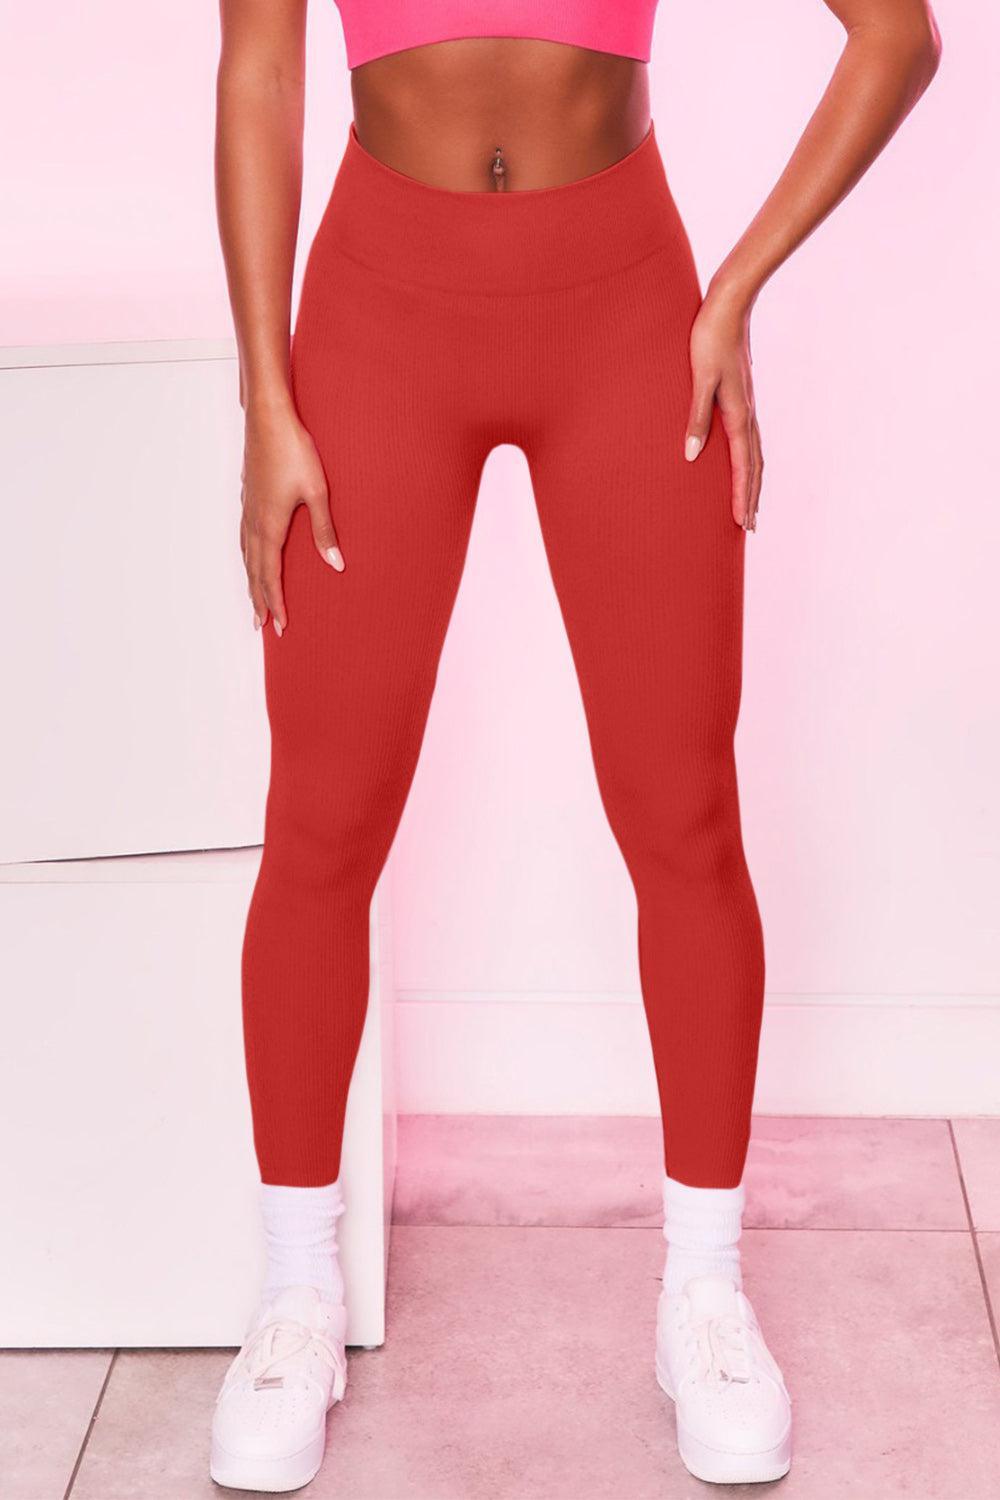 a woman in a pink sports bra top and red leggings